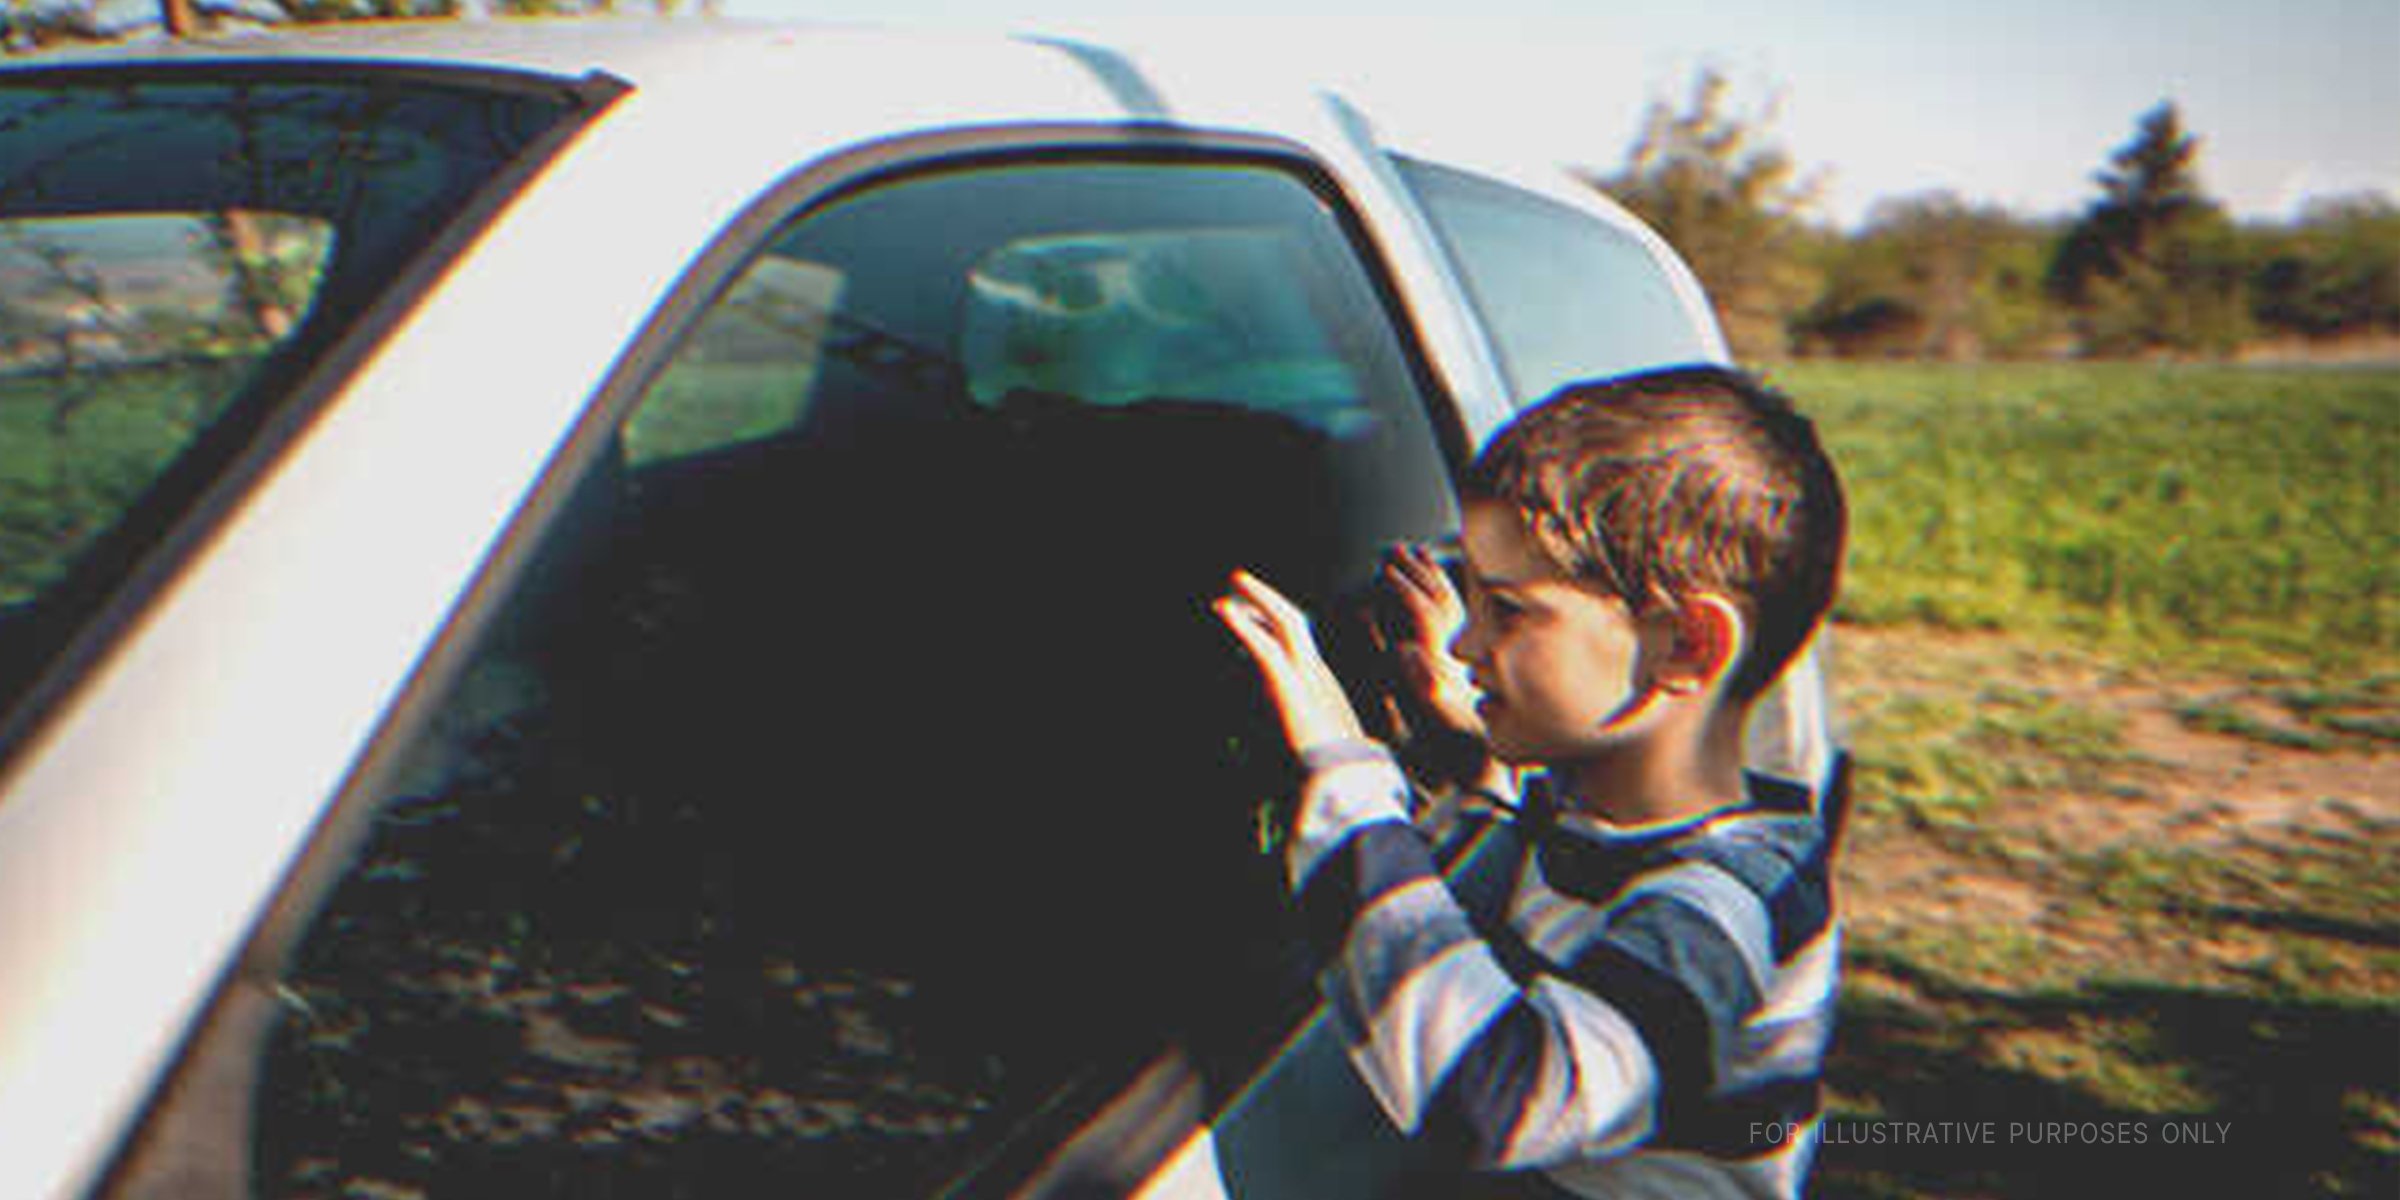 Little boy peeping into a car | Getty Images